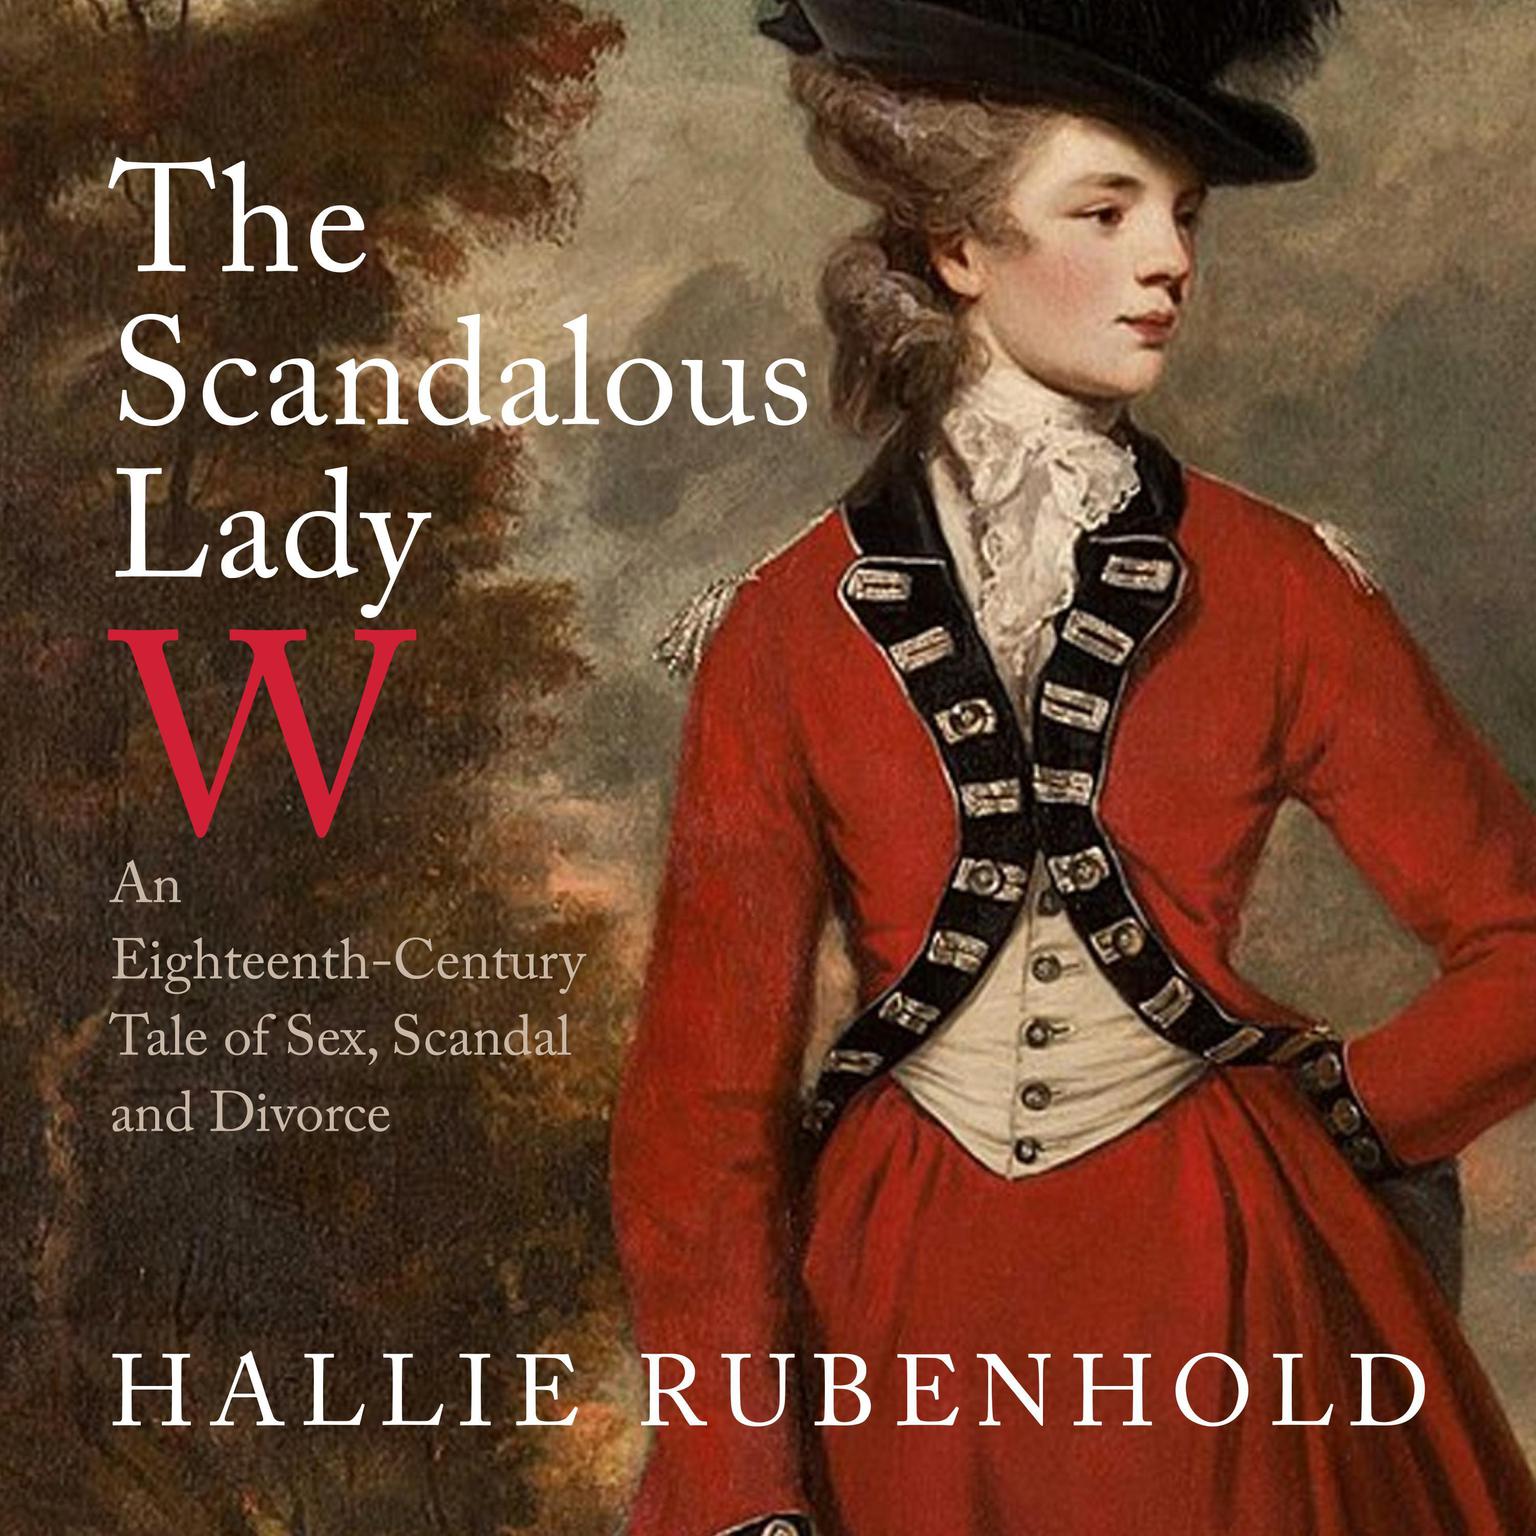 The Scandalous Lady W: An Eighteenth-Century Tale of Sex, Scandal and Divorce Audiobook, by Hallie Rubenhold